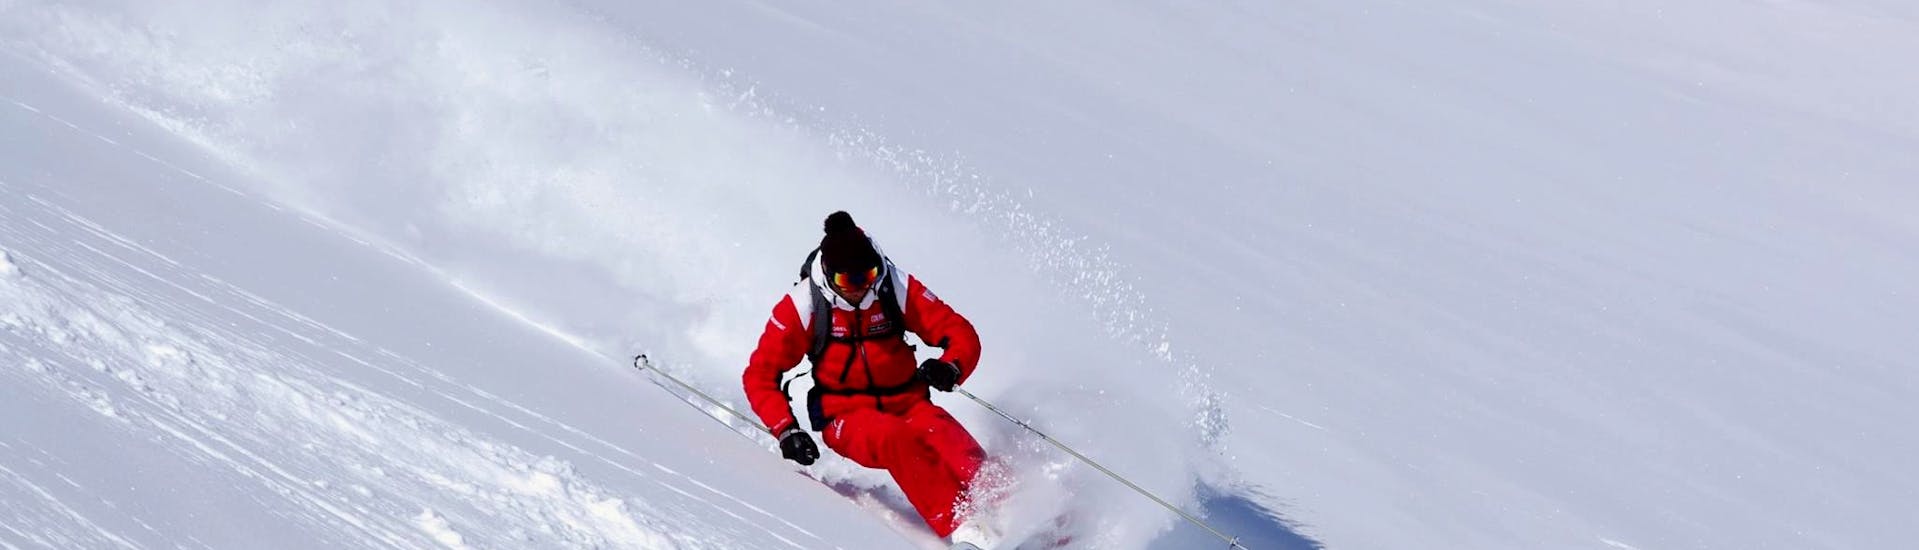 A skier in the powder during a private ski lesson for adults at the Ski School ESF Valmorel.